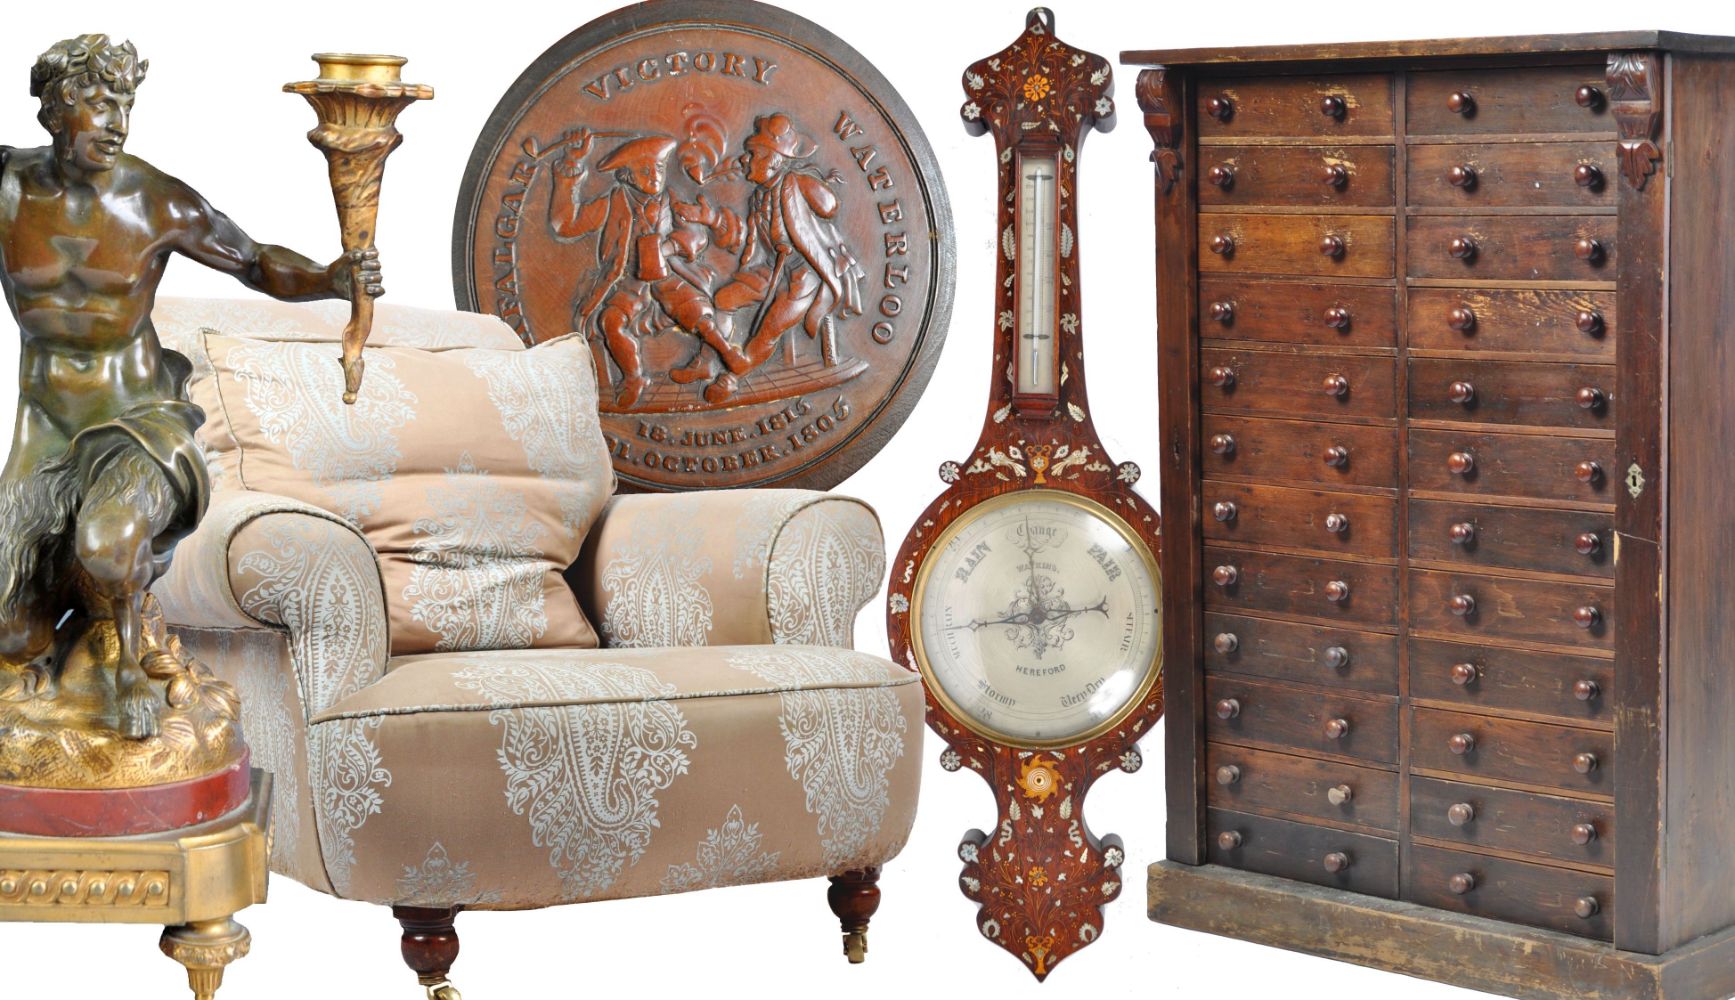 May Antiques & Collectables - Furniture & Decorative Interiors Timed Auction - East Bristol Auctions